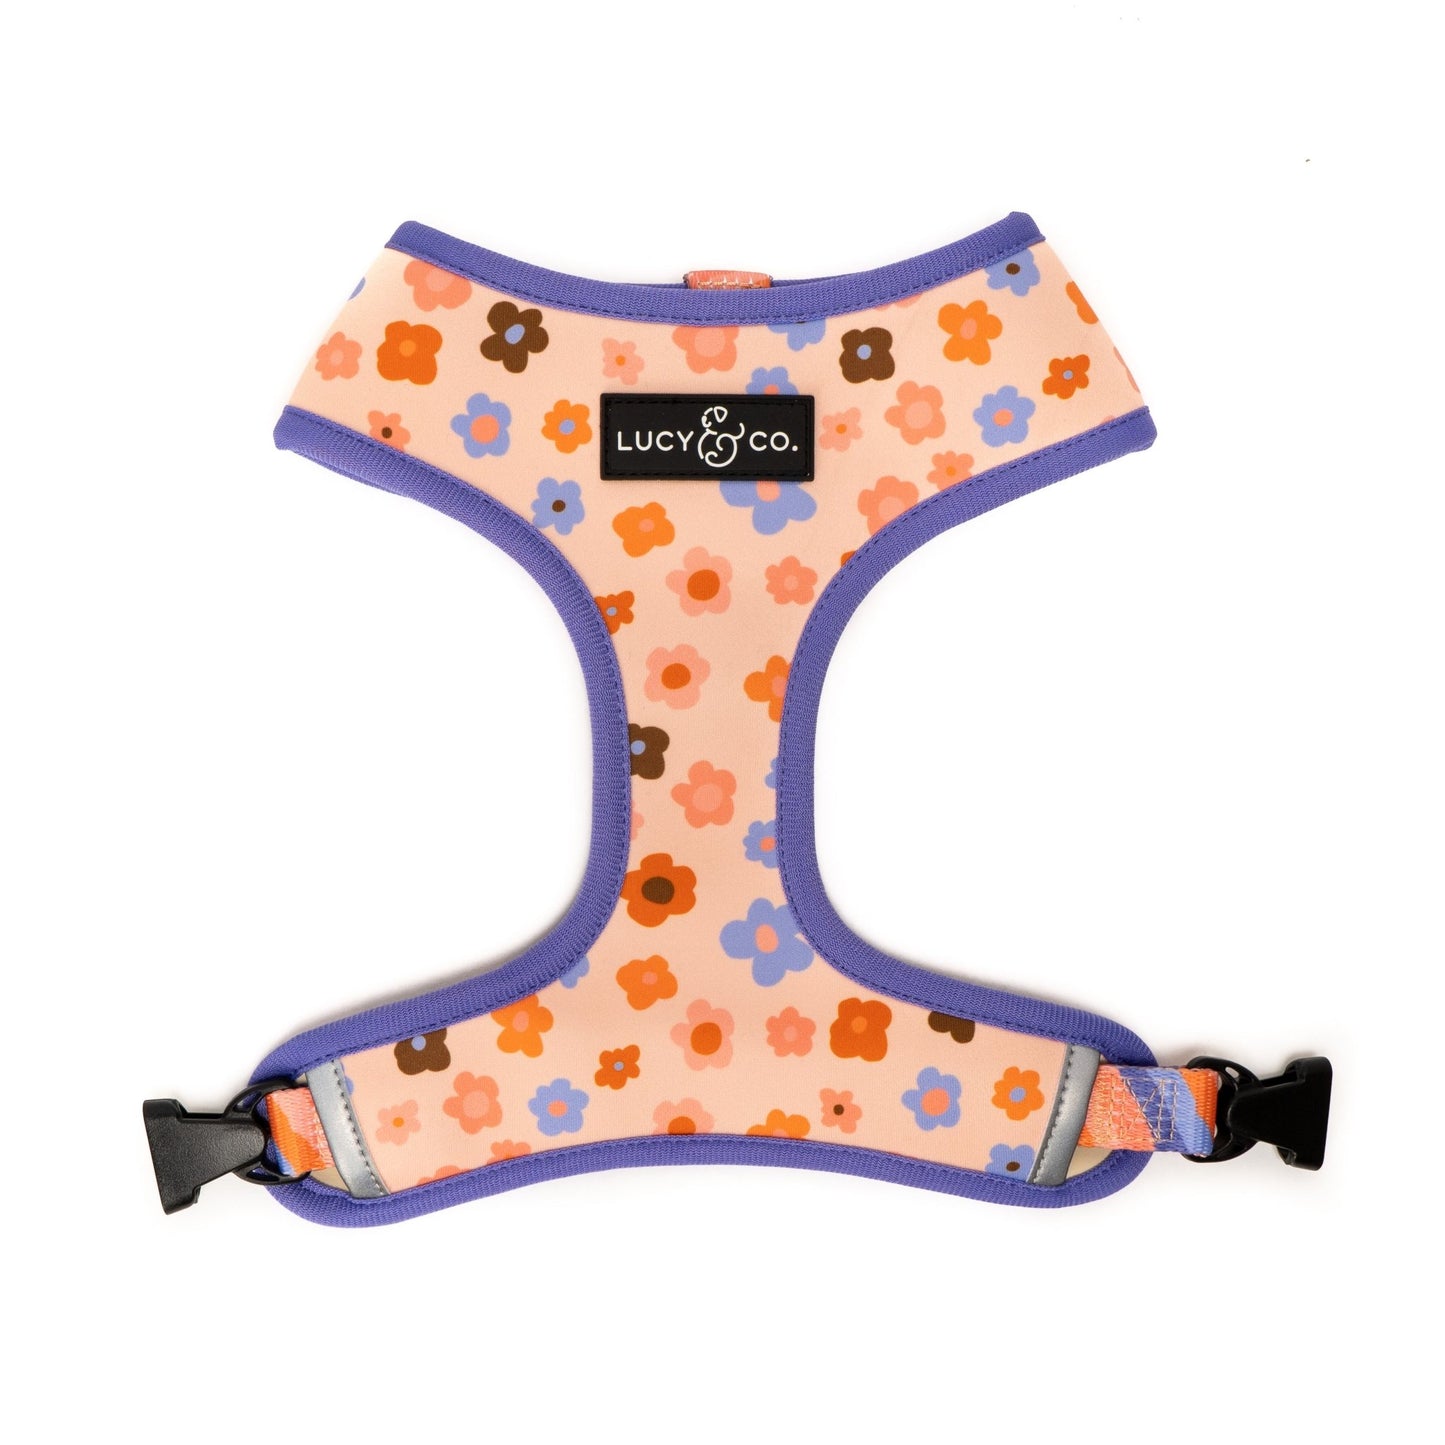 The Let's Groove Reversible Harness